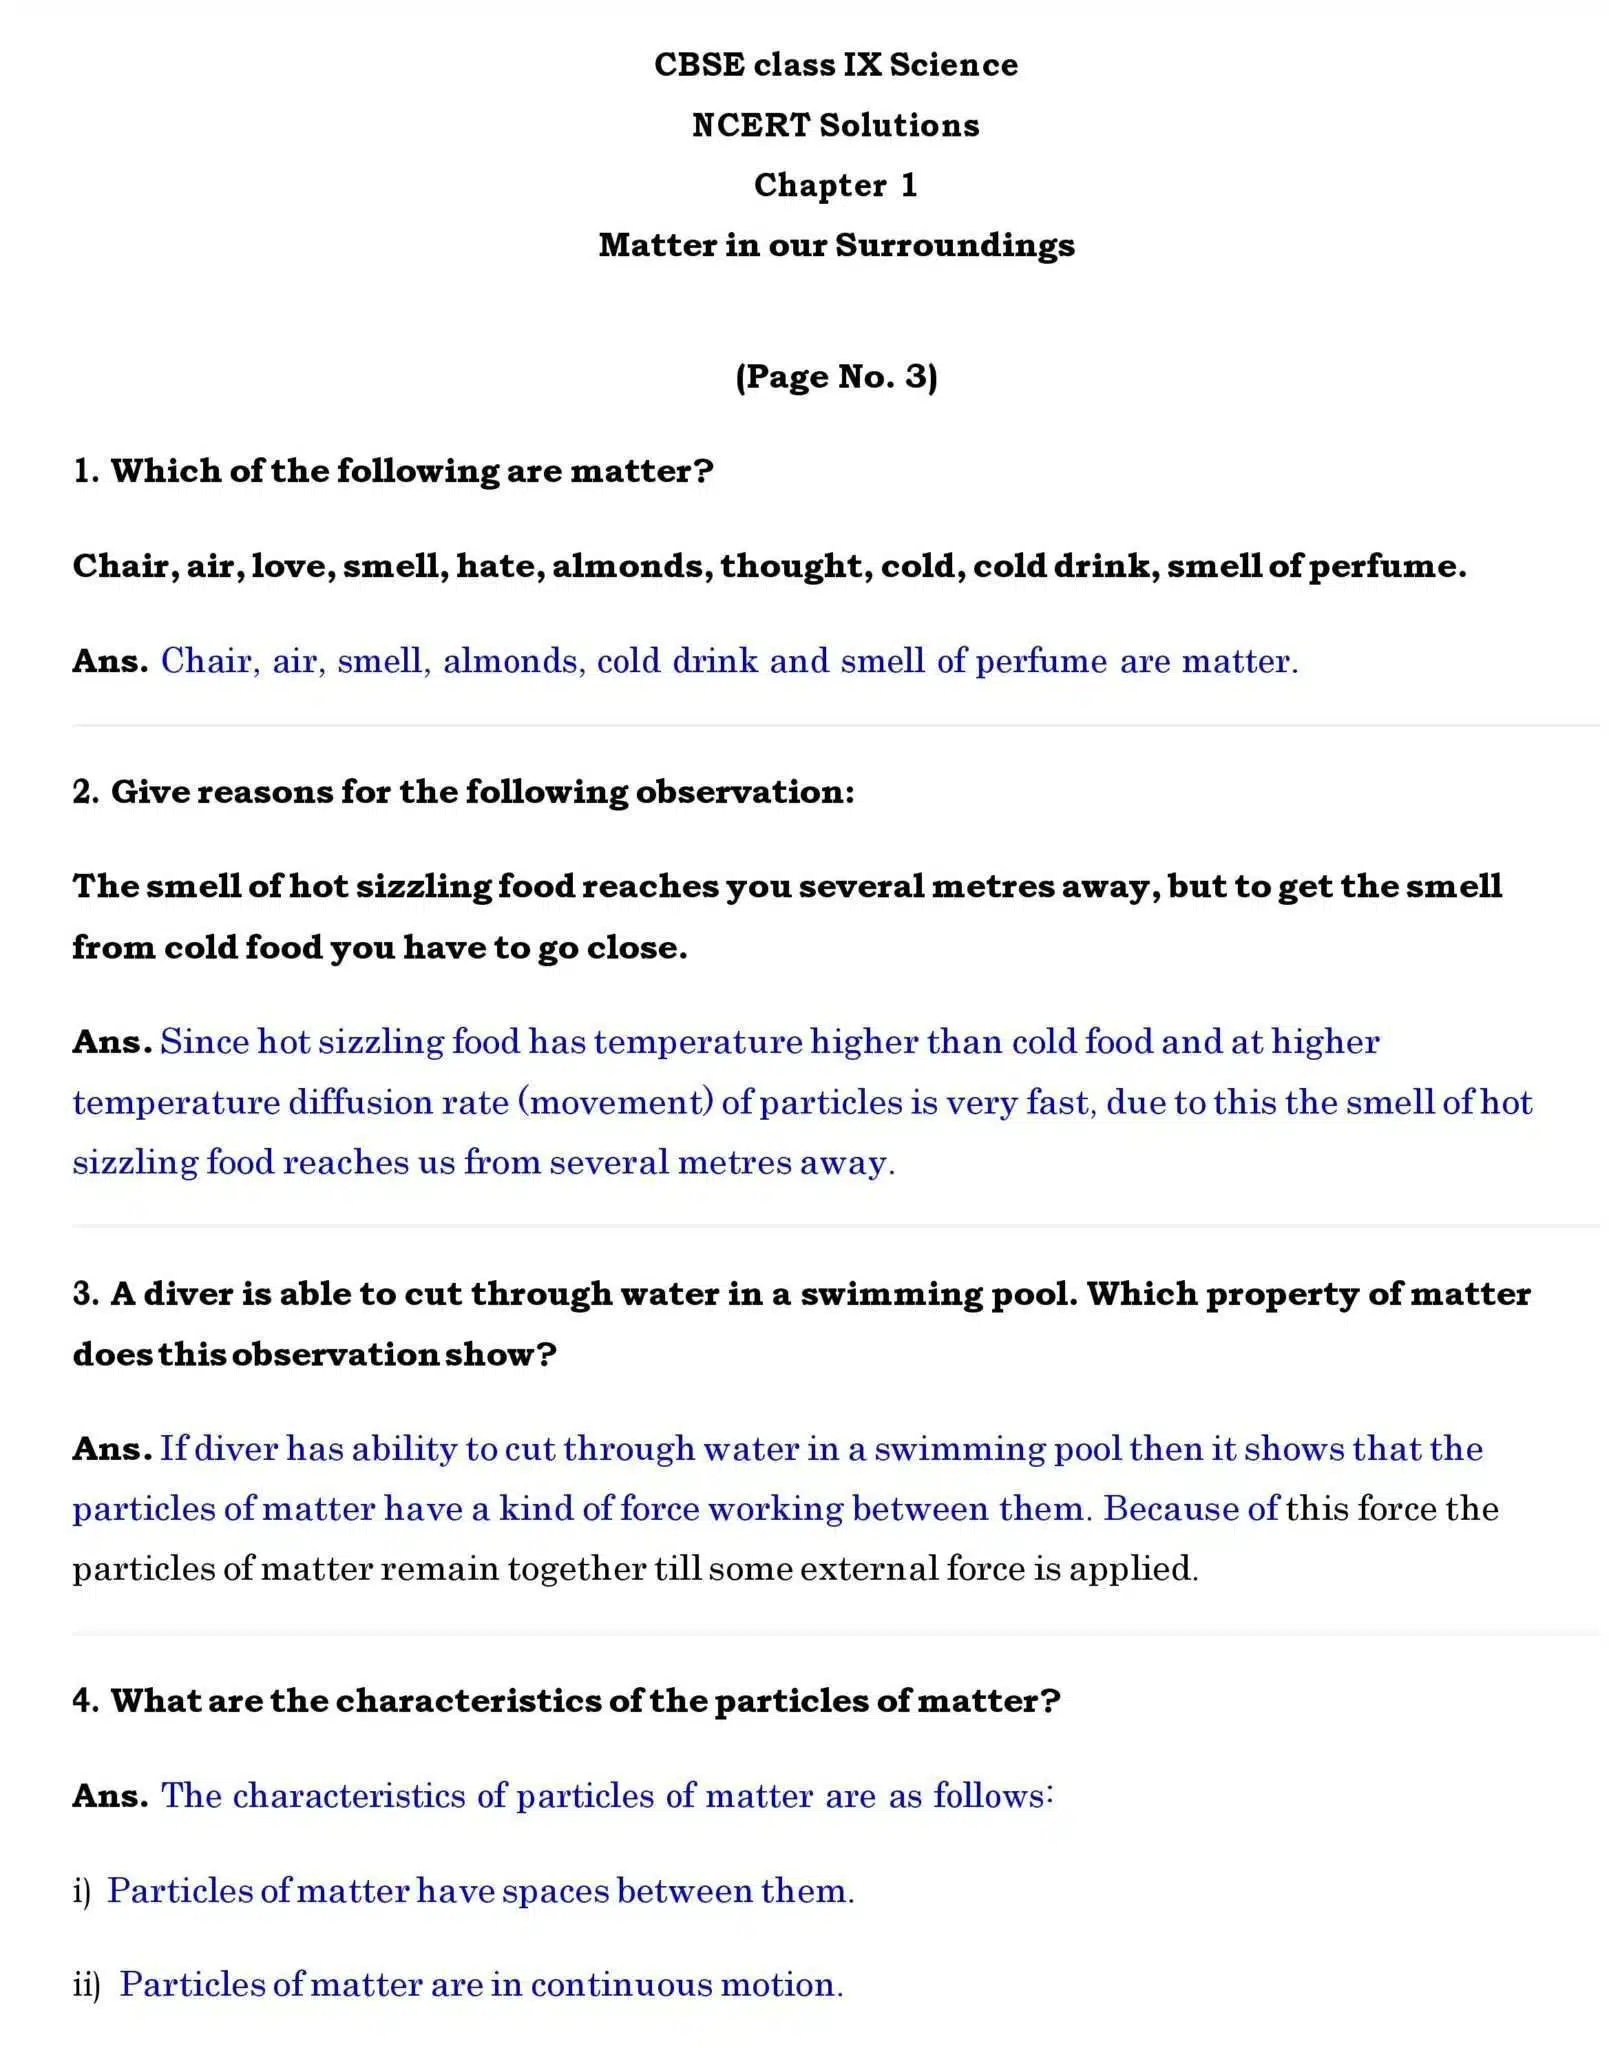 Ch 1 Science Matter in our Surroundings page 001